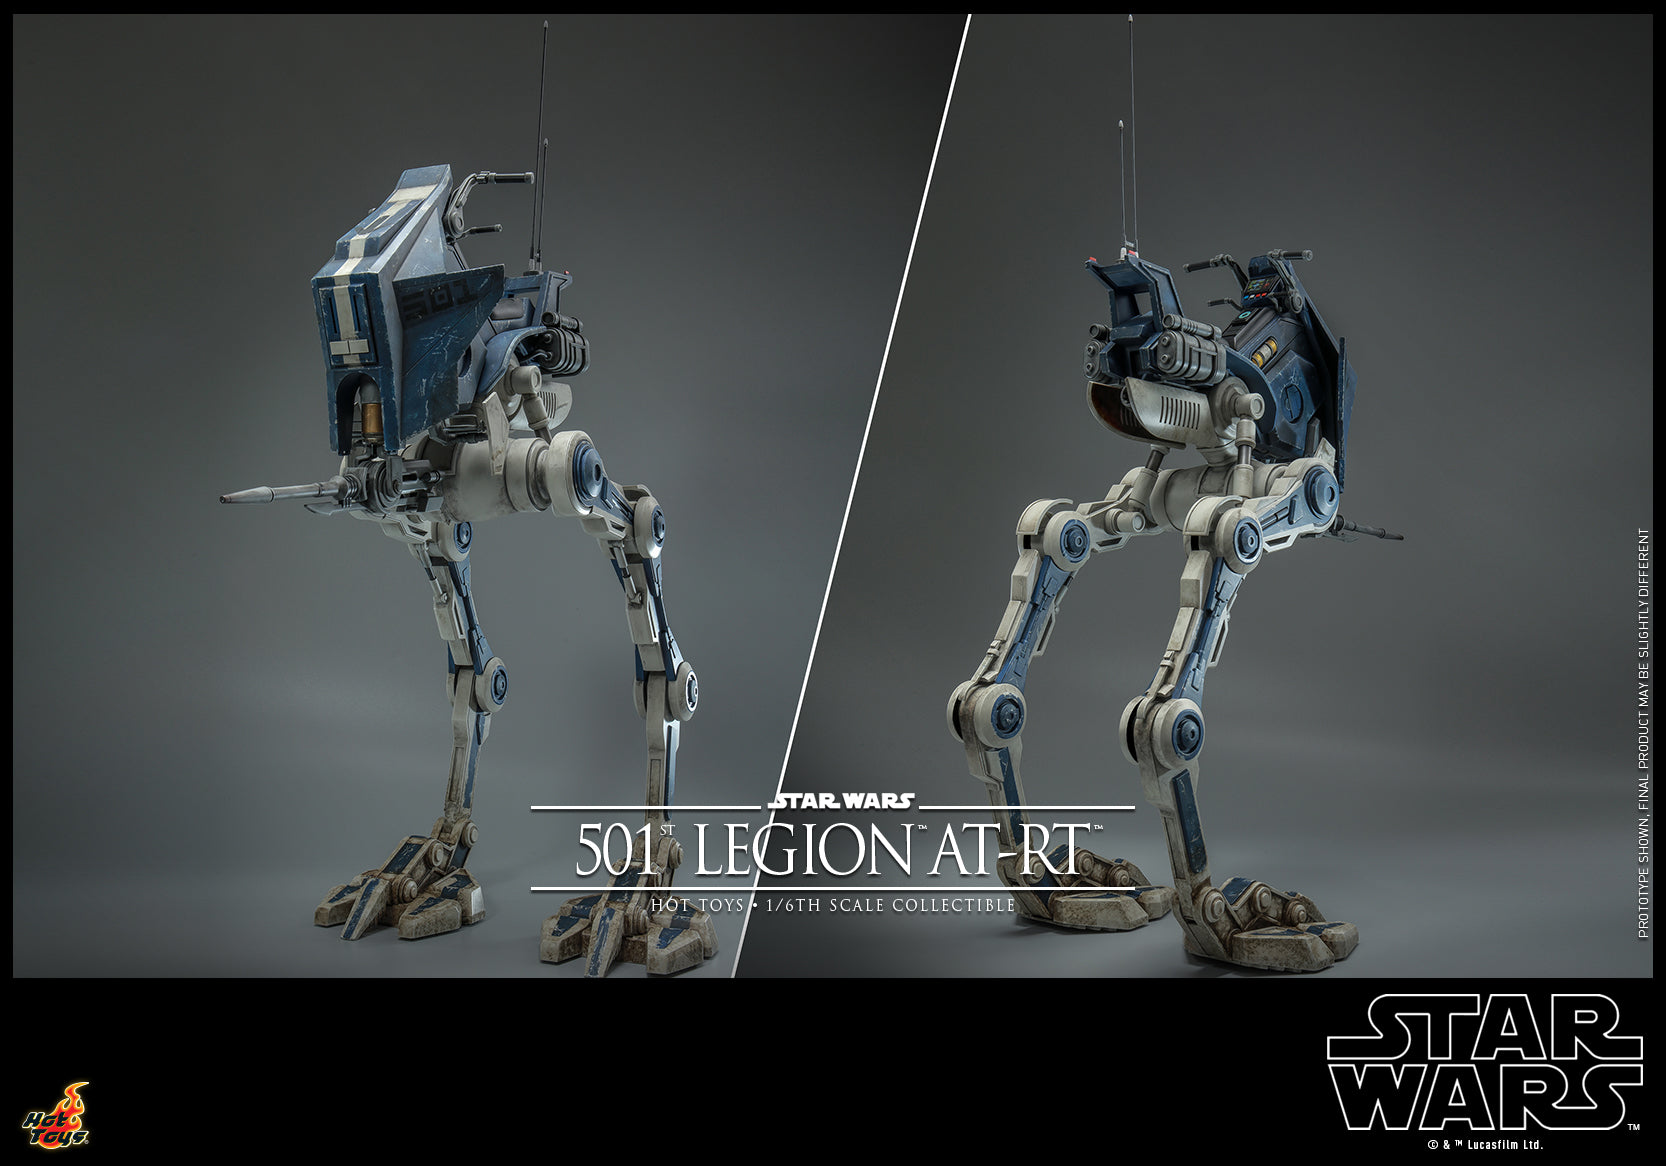 Hot Toys - TMS090 - Star Wars: The Clone Wars - 501st Legion AT-RT - Marvelous Toys